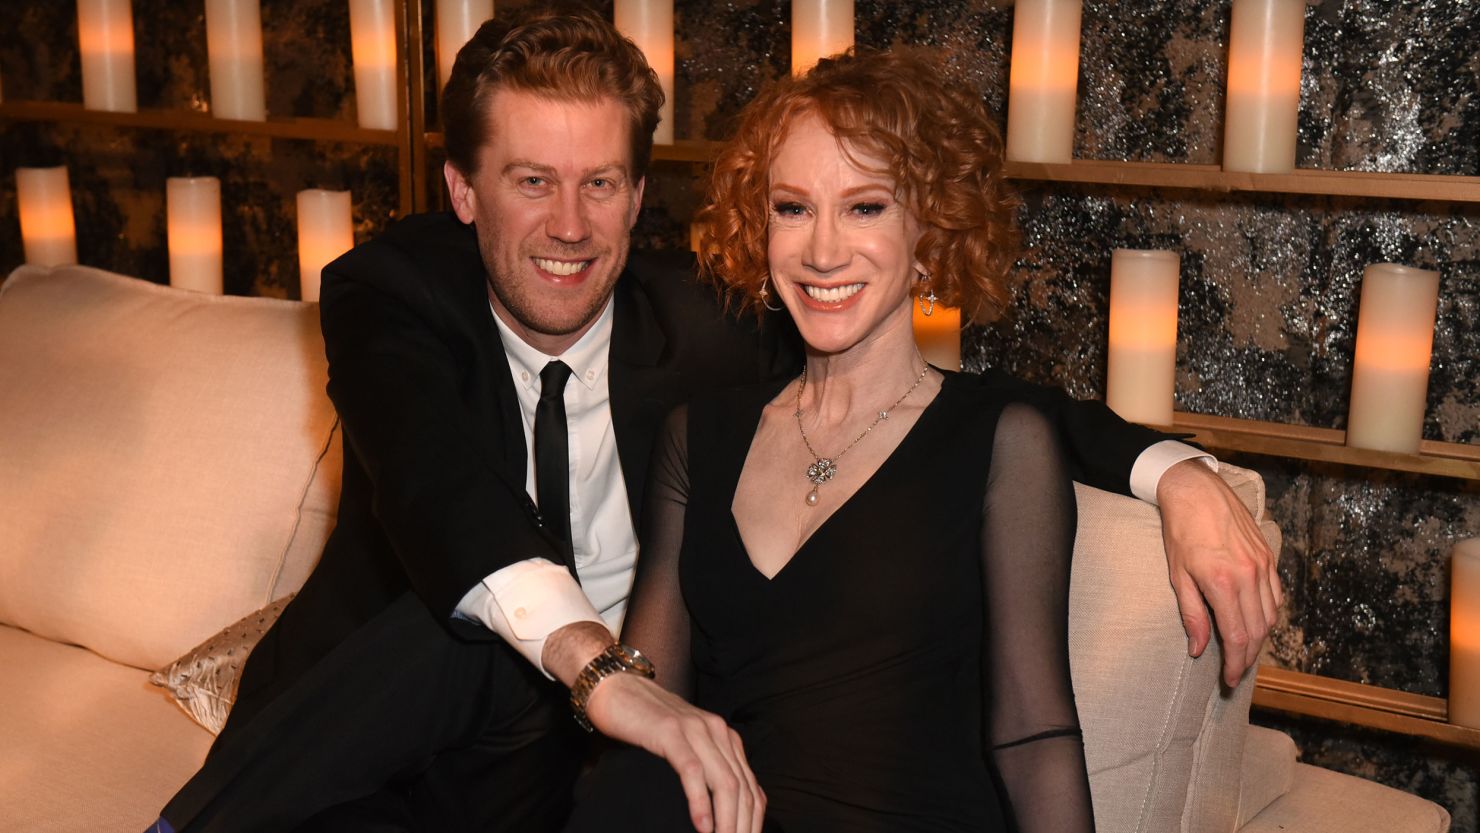 LOS ANGELES, CALIFORNIA - SEPTEMBER 22: Randy Bick (L) and Kathy Griffin attend HBO's Official 2019 Emmy After Party on September 22, 2019 in Los Angeles, California. (Photo by FilmMagic/FilmMagic for HBO)